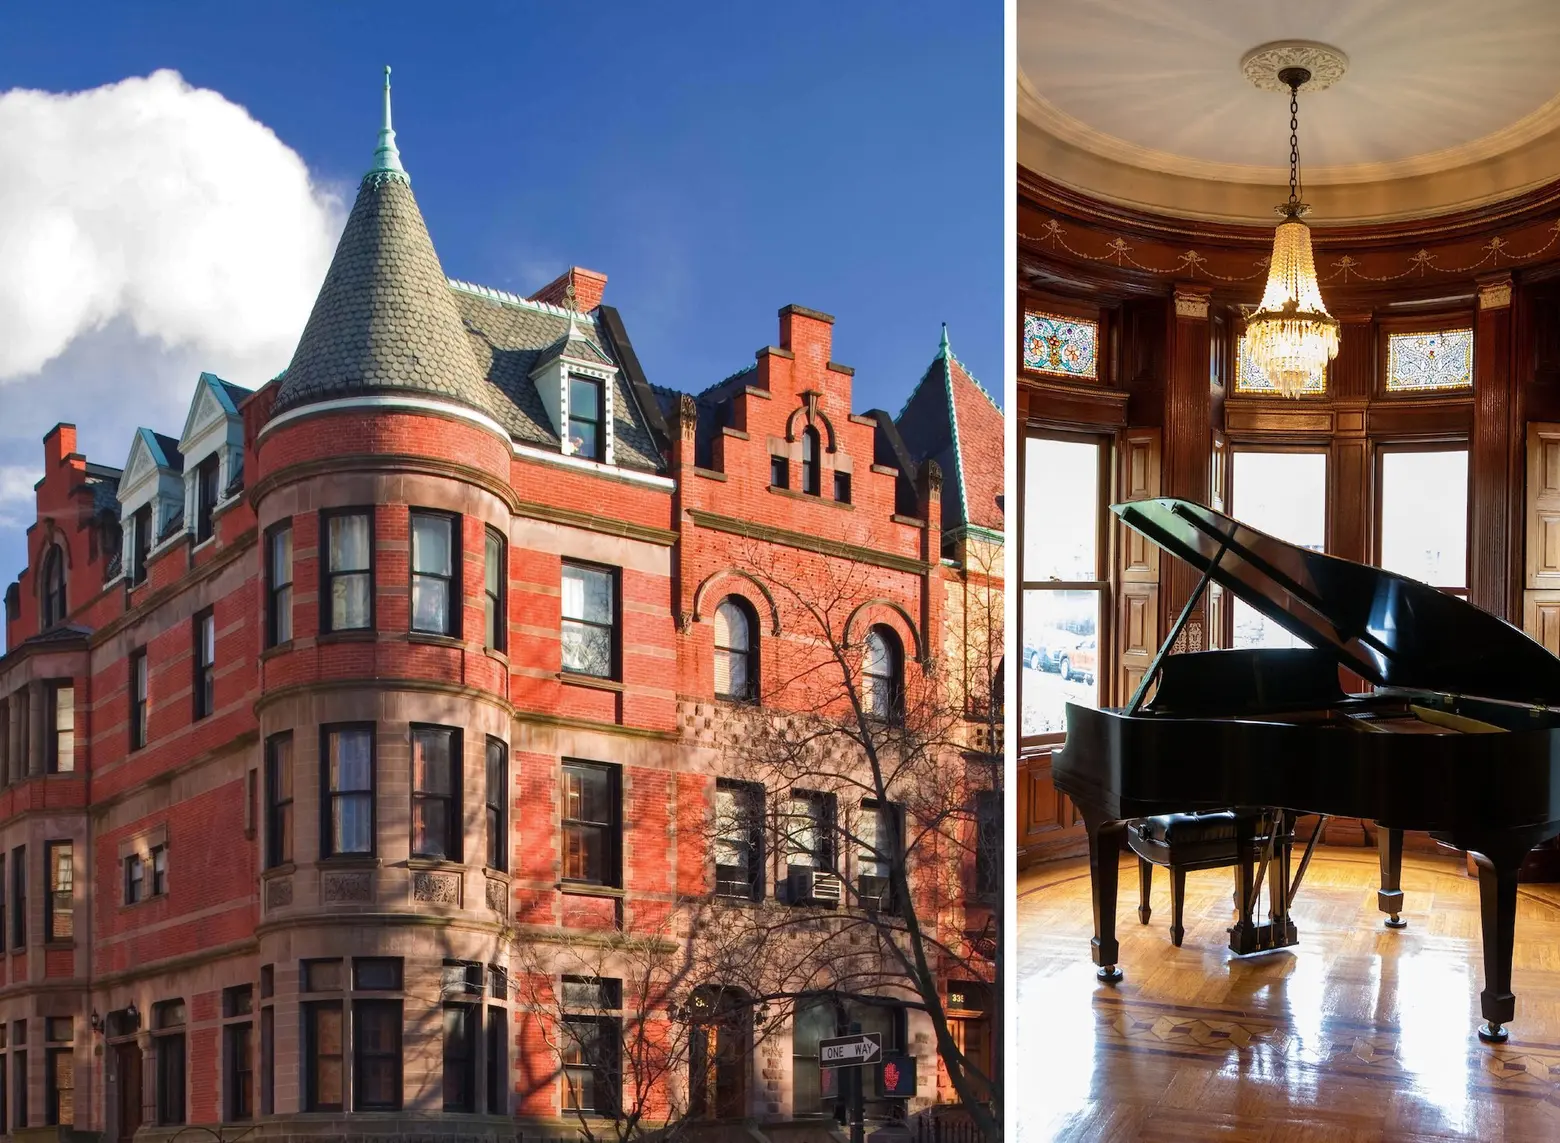 Hamilton Heights brownstone from ‘The Royal Tenenbaums’ can be booked on Airbnb for $20/night